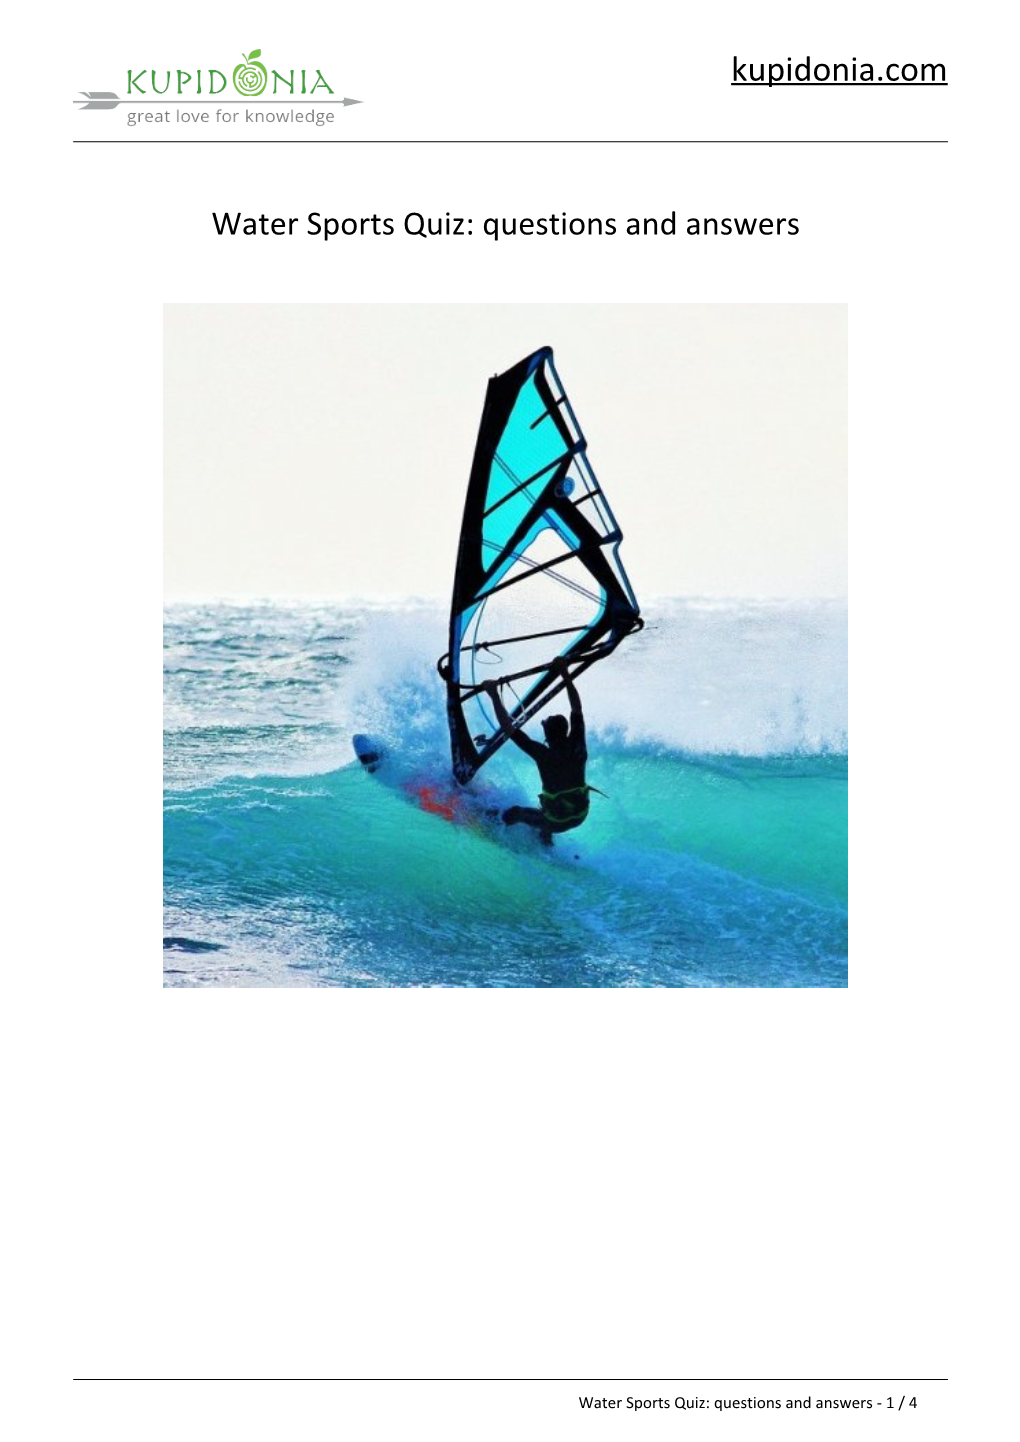 Water Sports Quiz: Questions and Answers